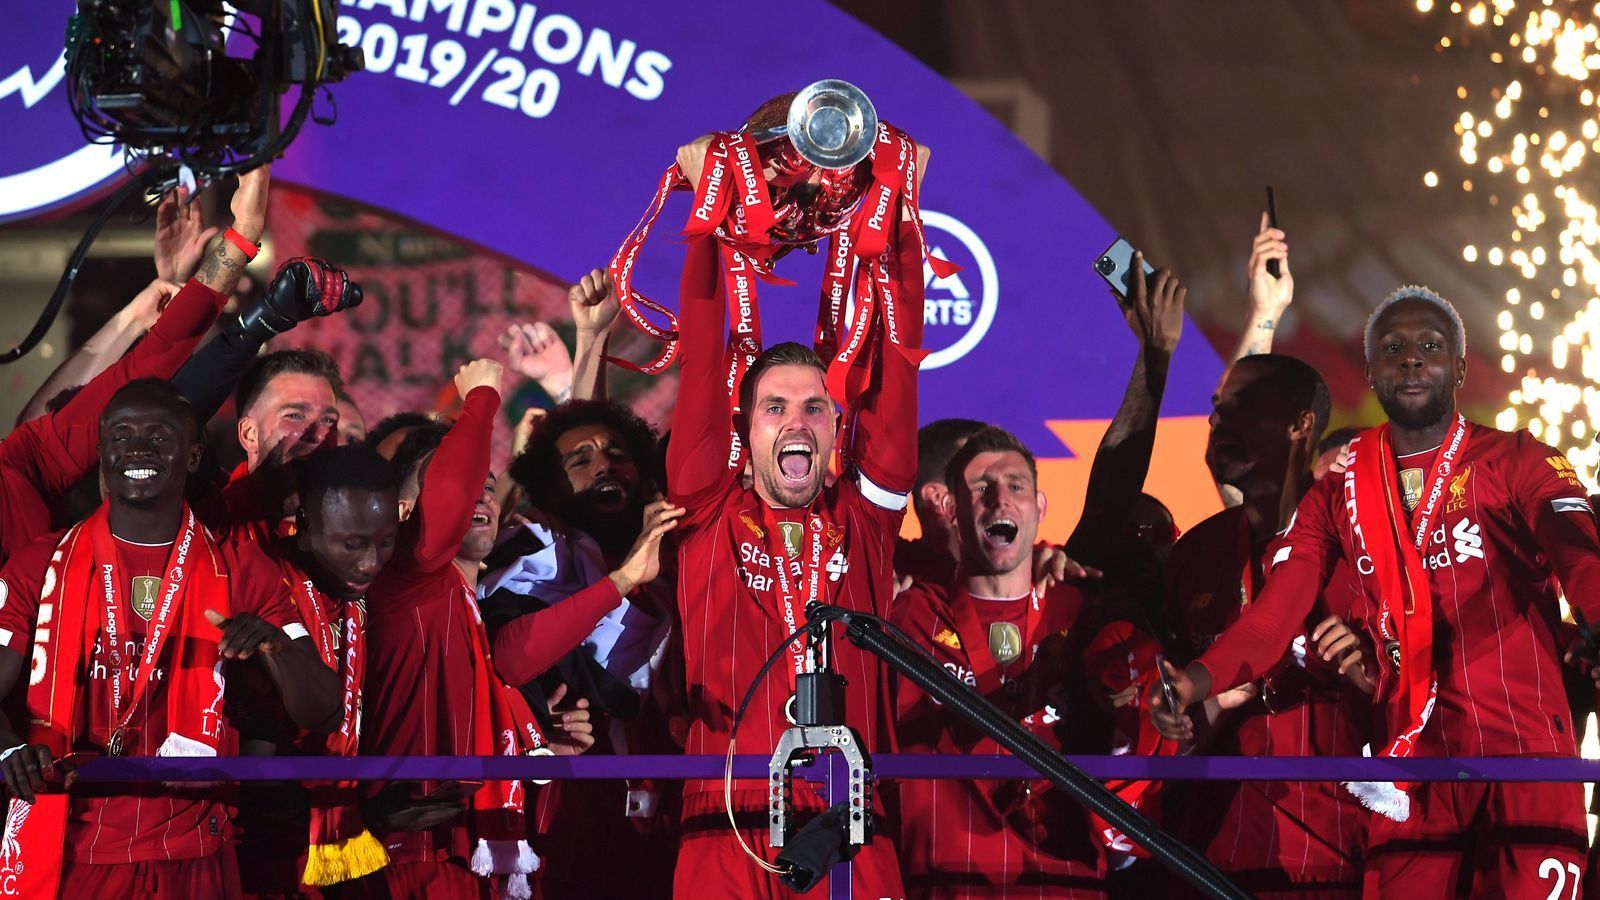 Liverpool lift Premier League trophy: Champions celebrate over Kop at Anfield after victory over Chelsea. Football News. FR24 News English